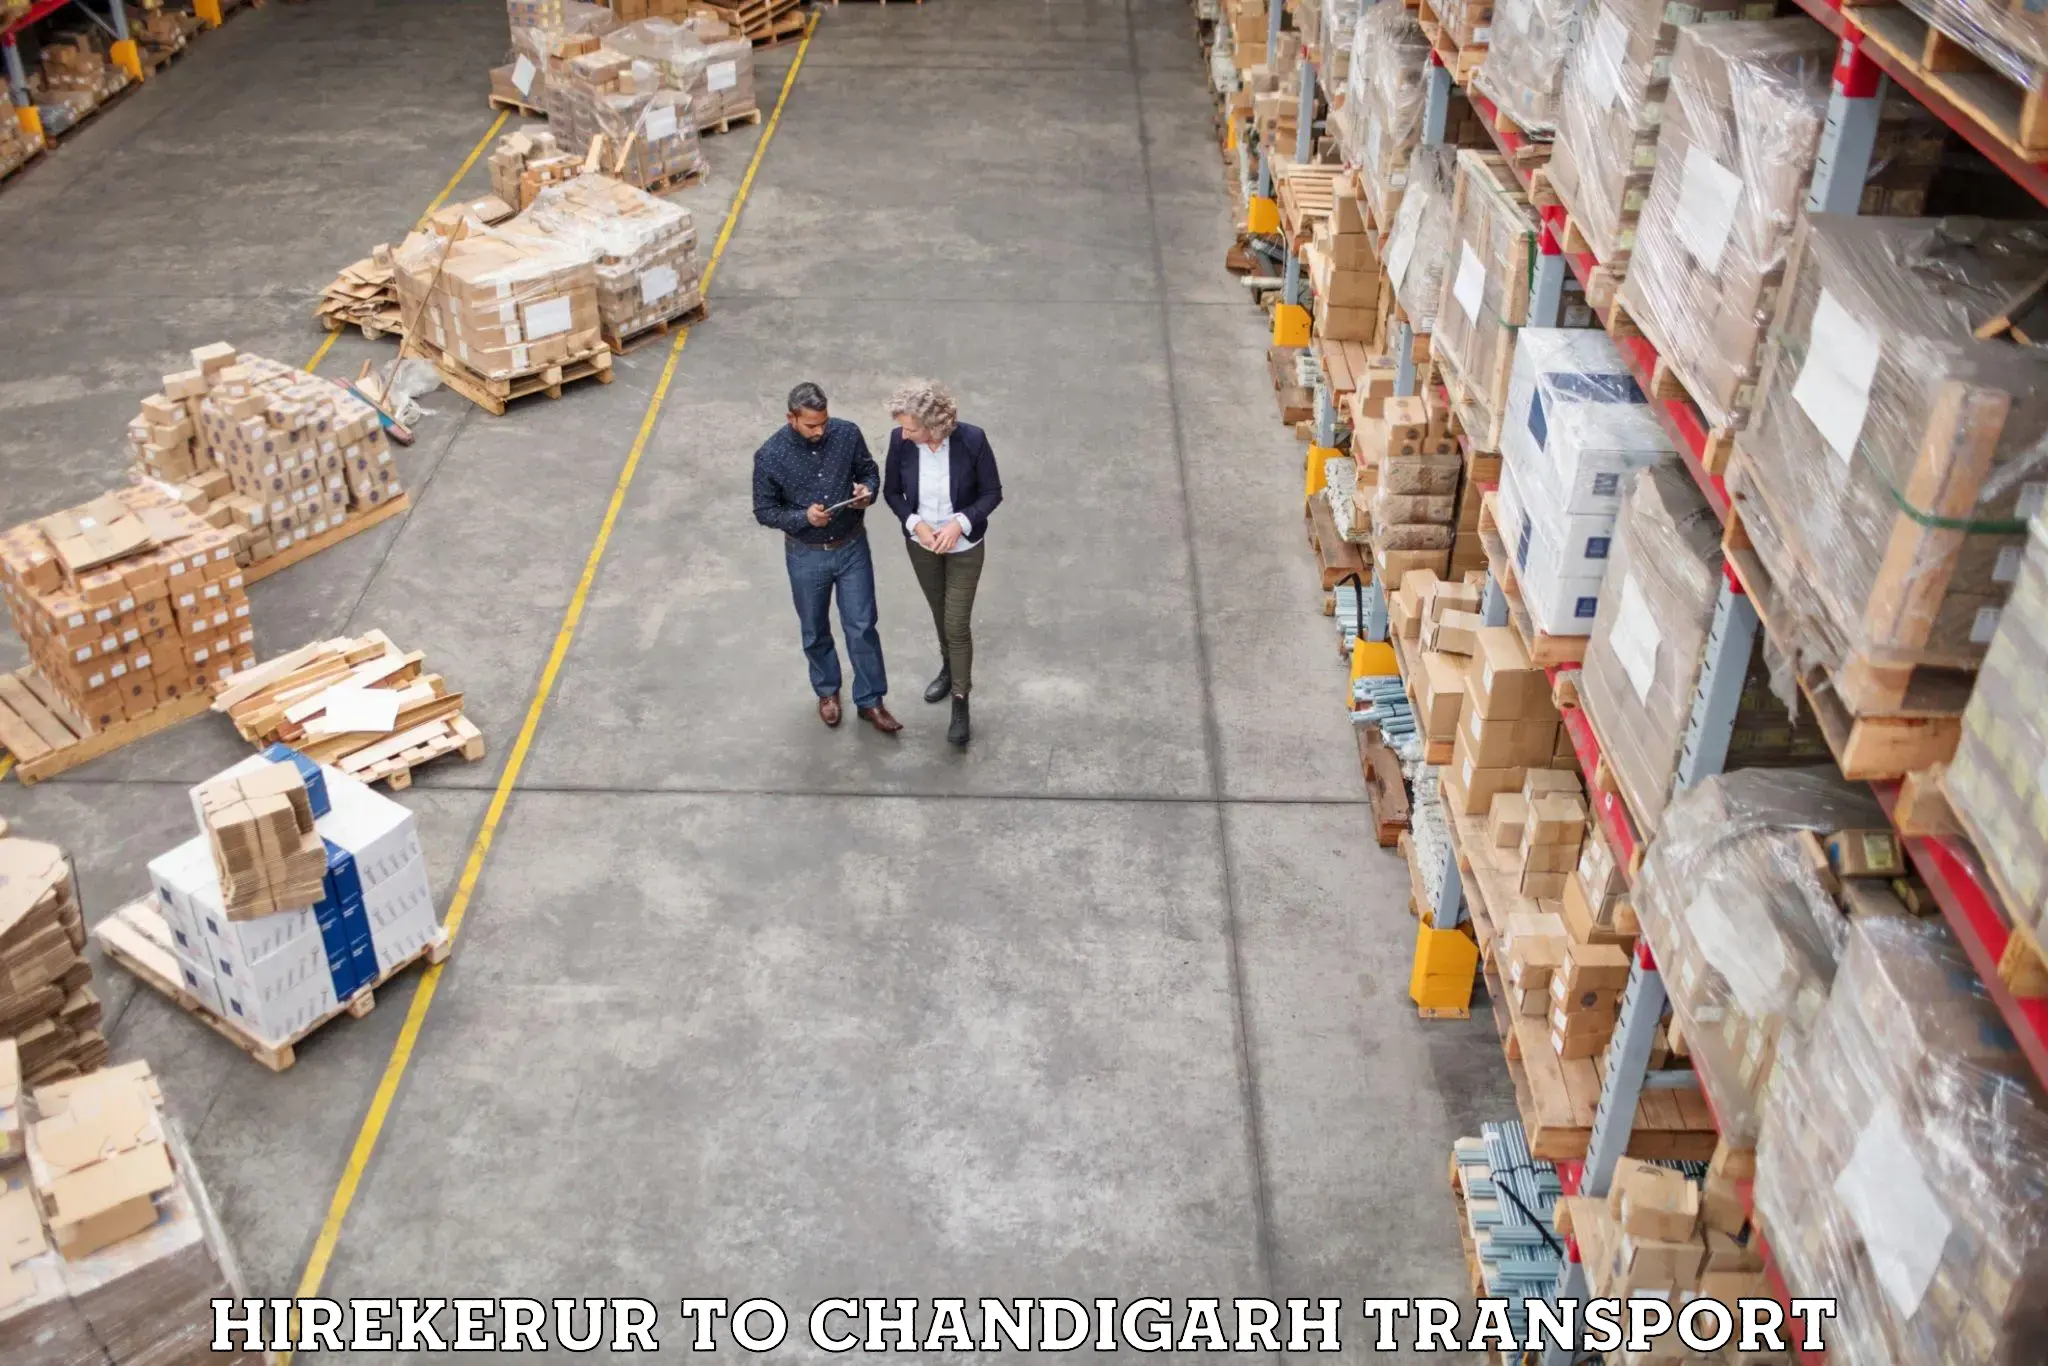 Part load transport service in India Hirekerur to Chandigarh